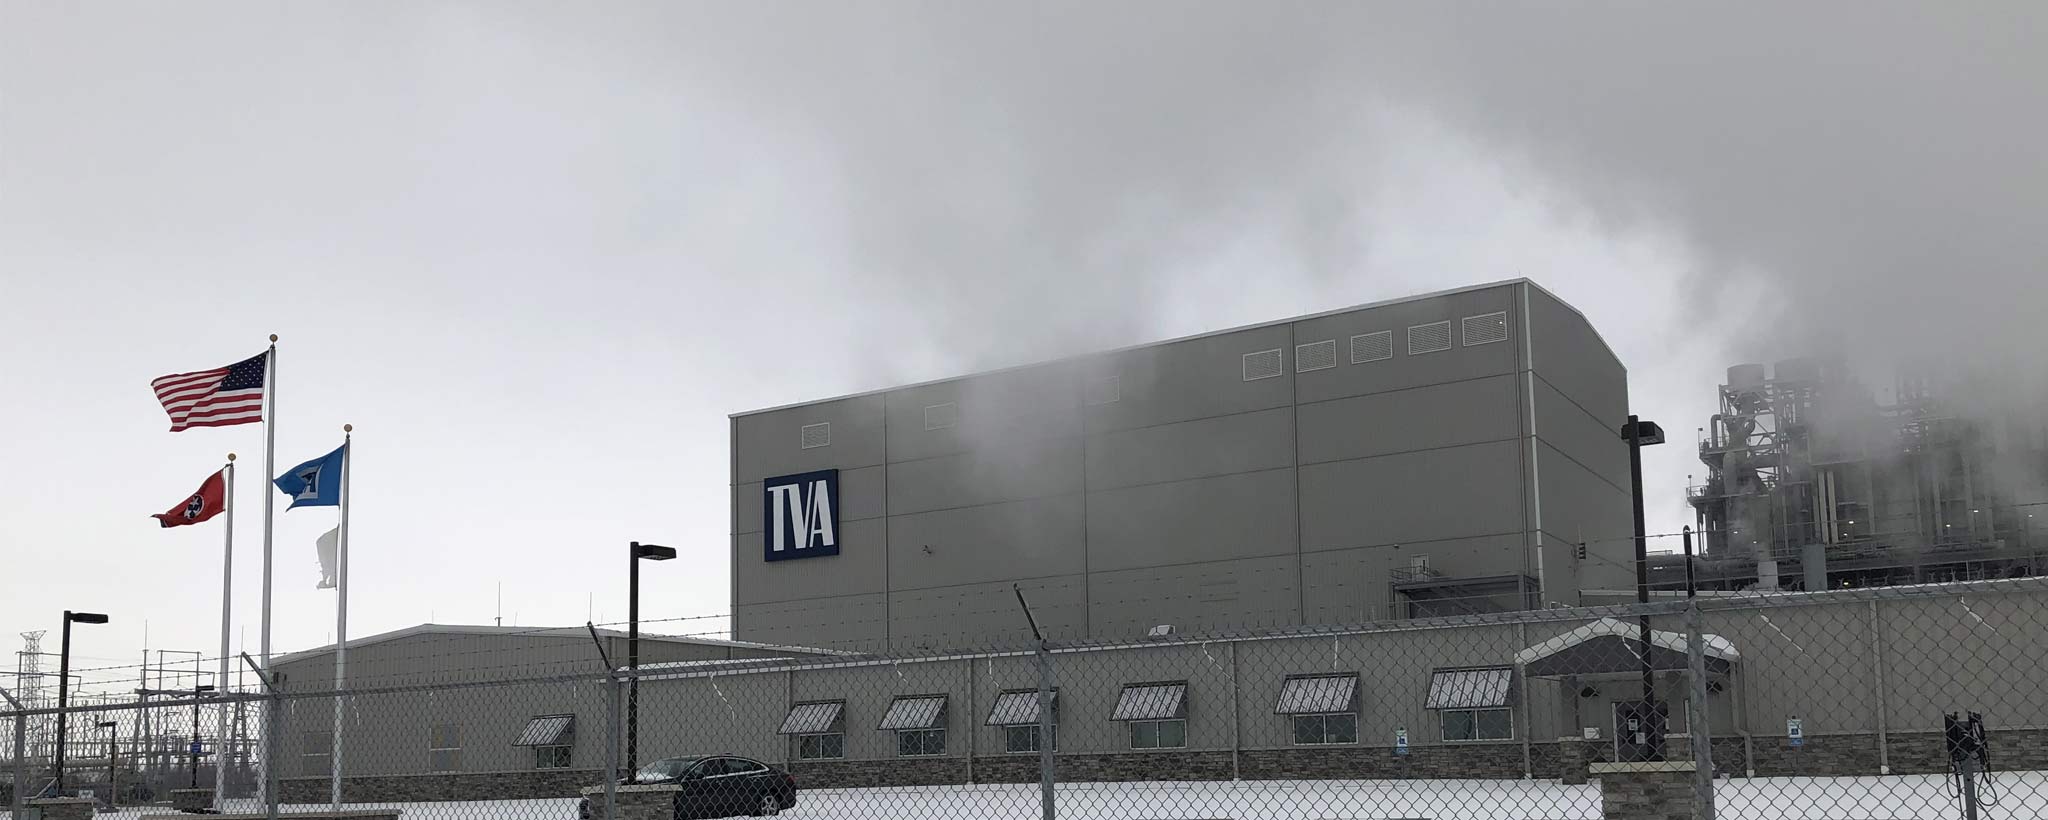 TVA Plant during winter